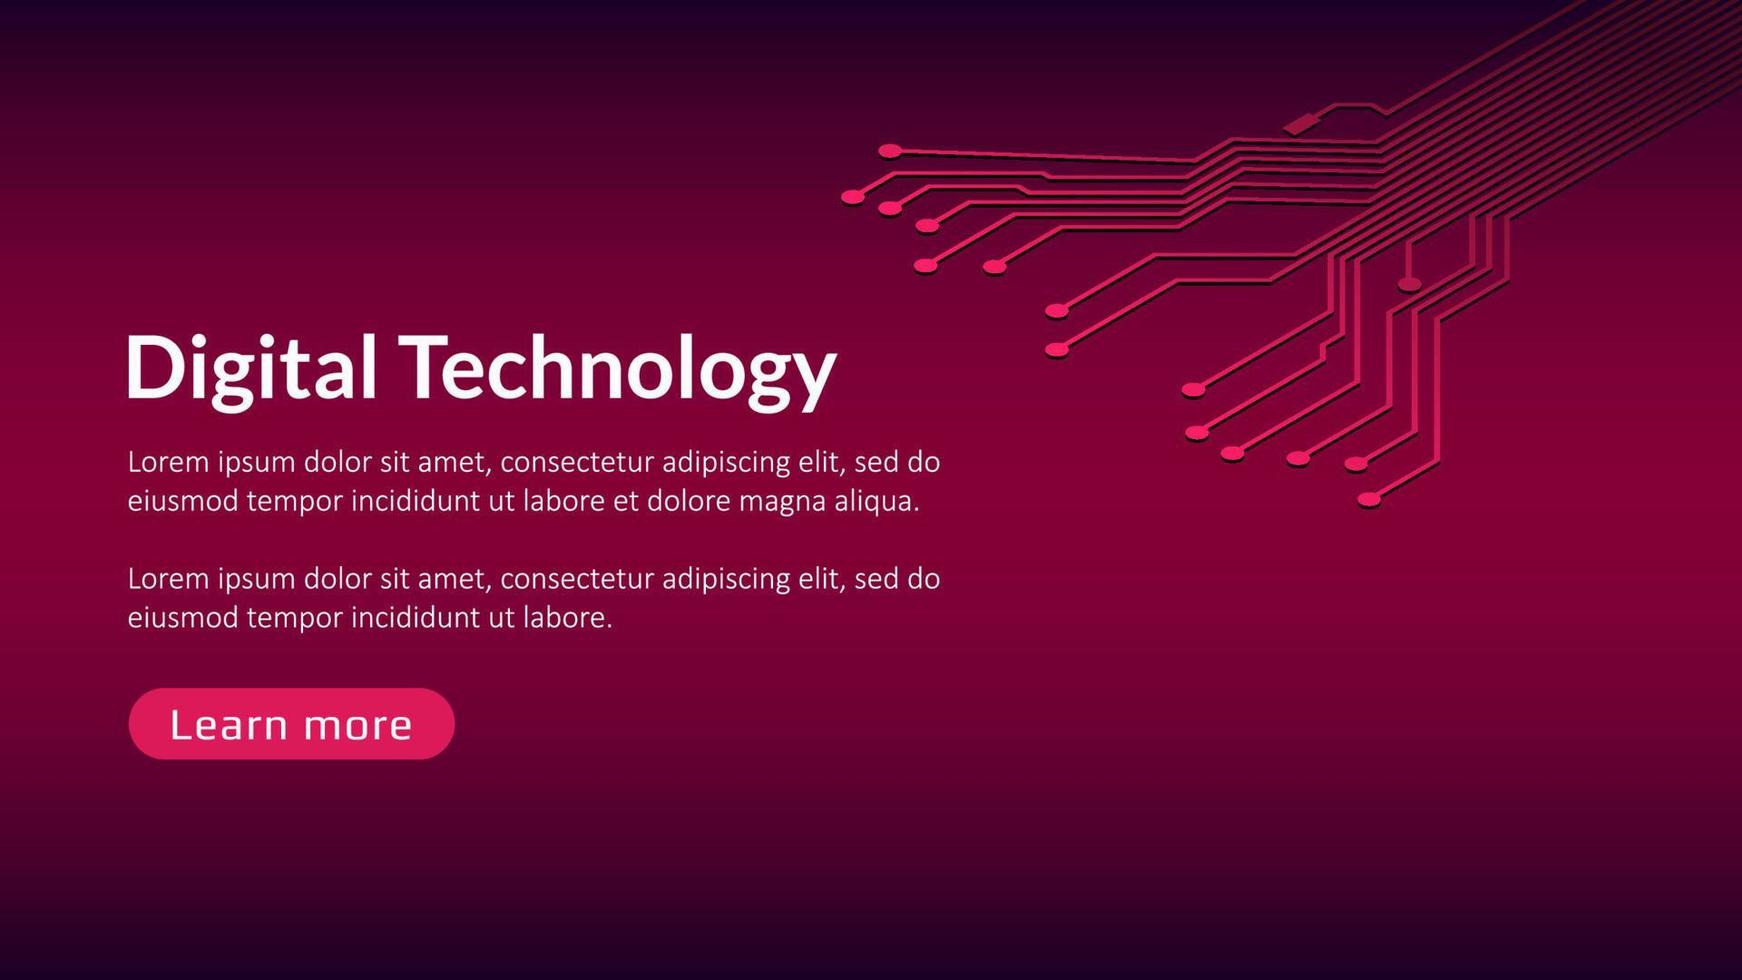 Digital technology template with copy space and button for websites, news or articles. PCB circuit board design element for banner on red background. vector